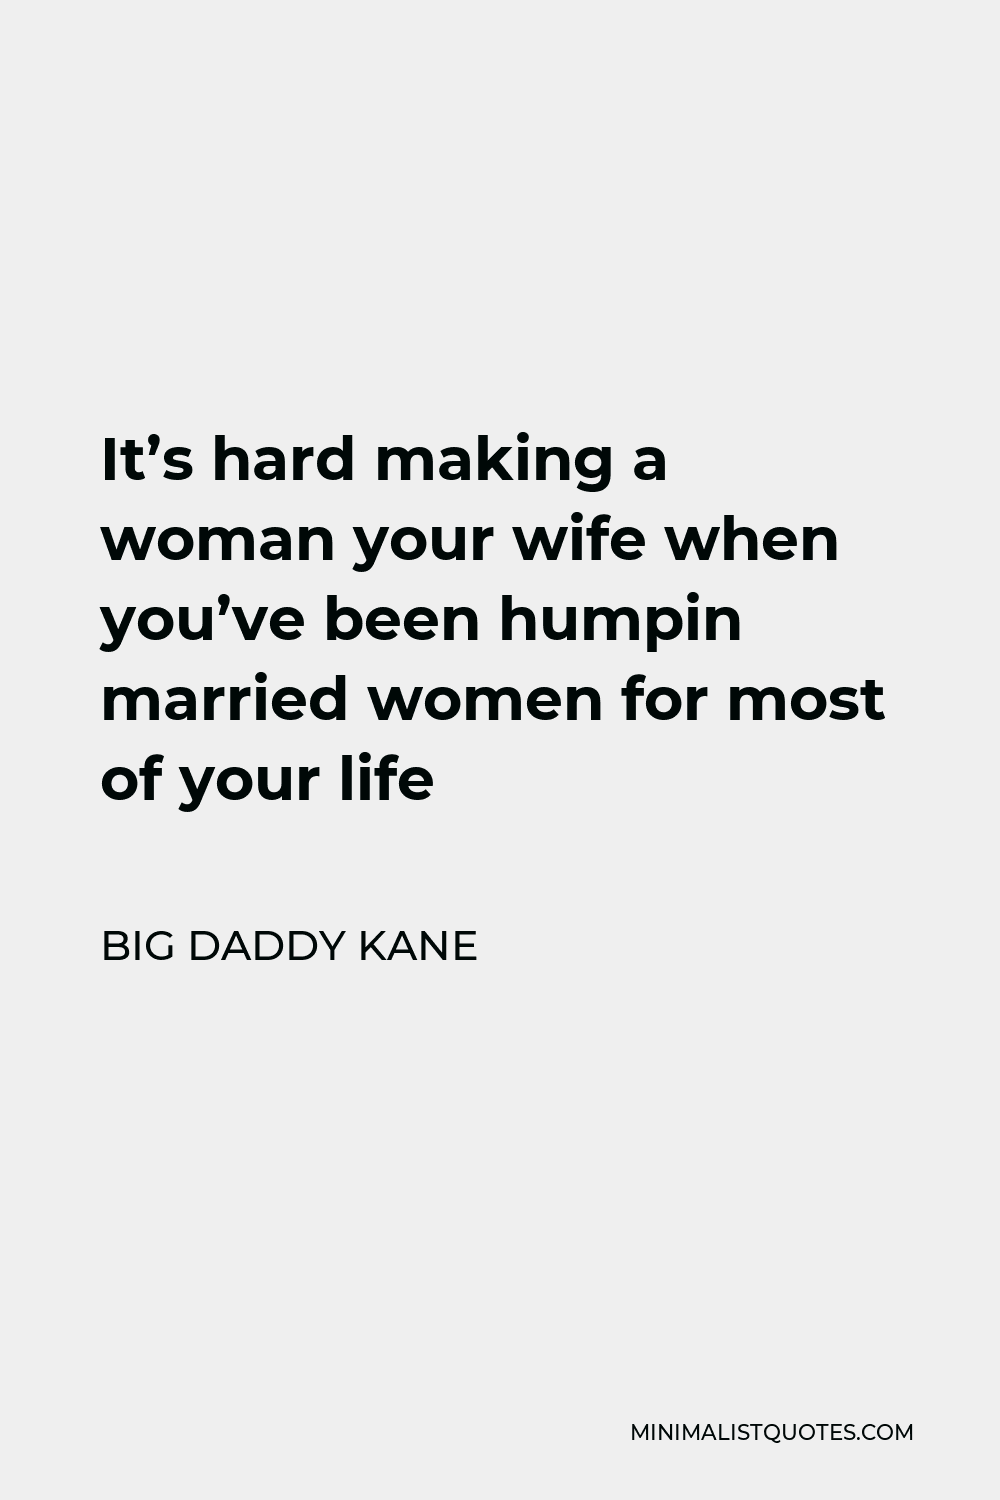 Big Daddy Kane Quote - It’s hard making a woman your wife when you’ve been humpin married women for most of your life